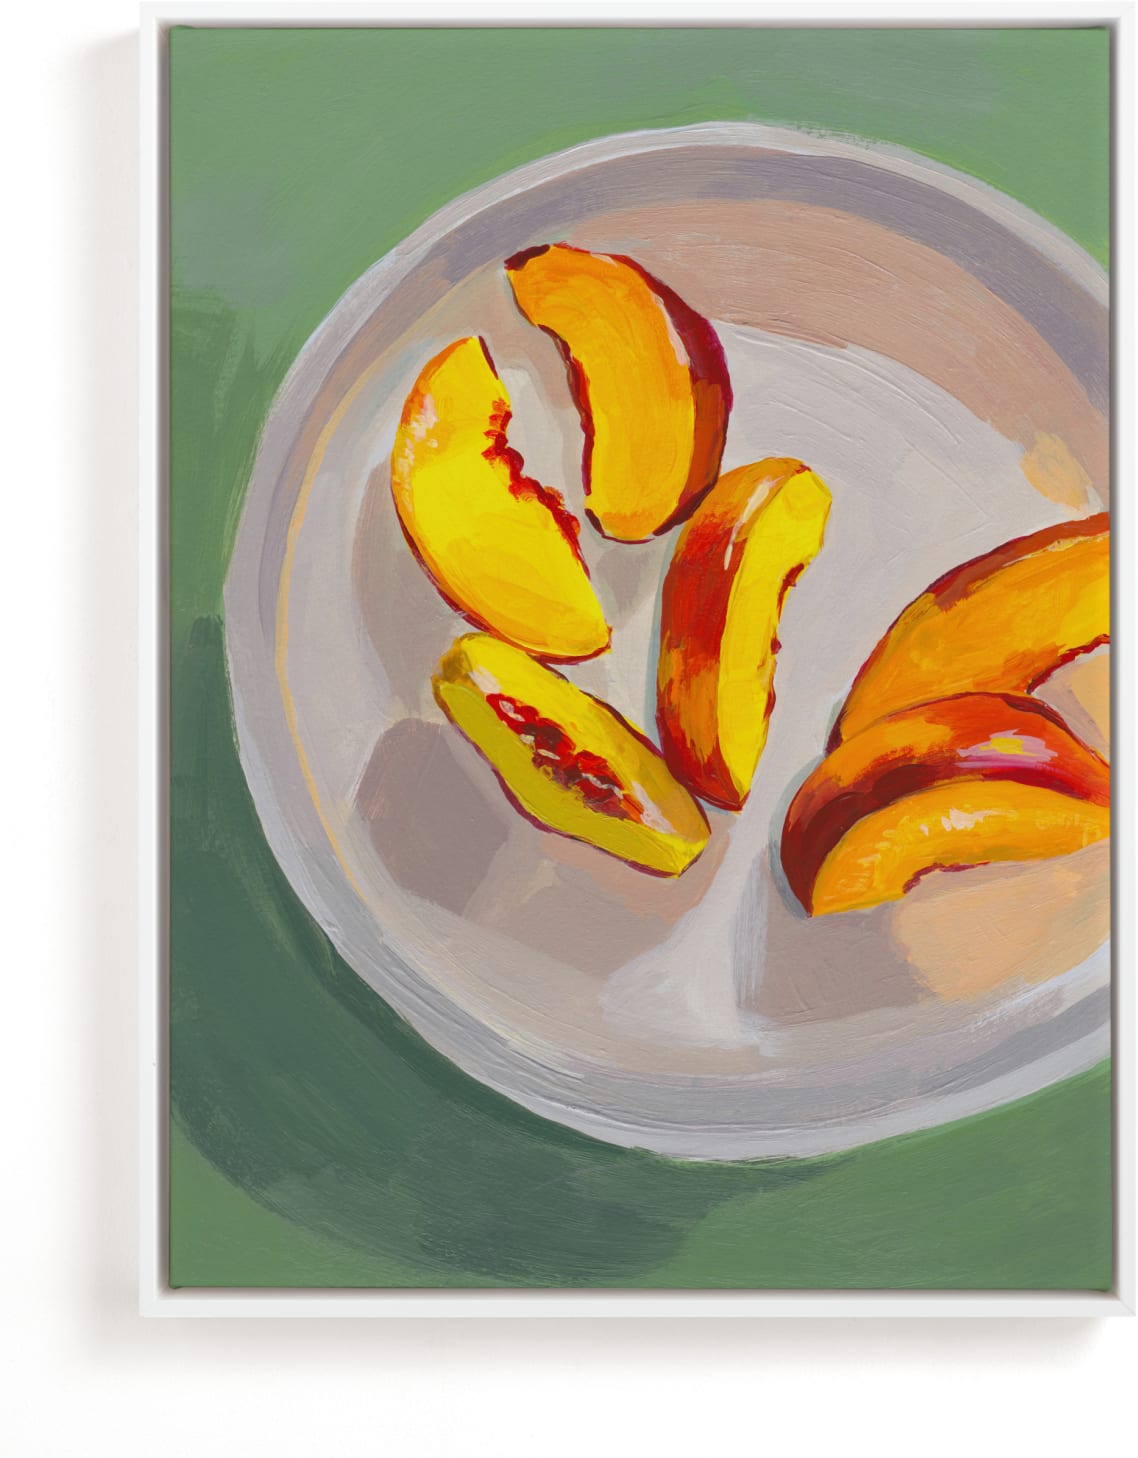 This is a yellow, green art by Patrice Horvath called Peaches.